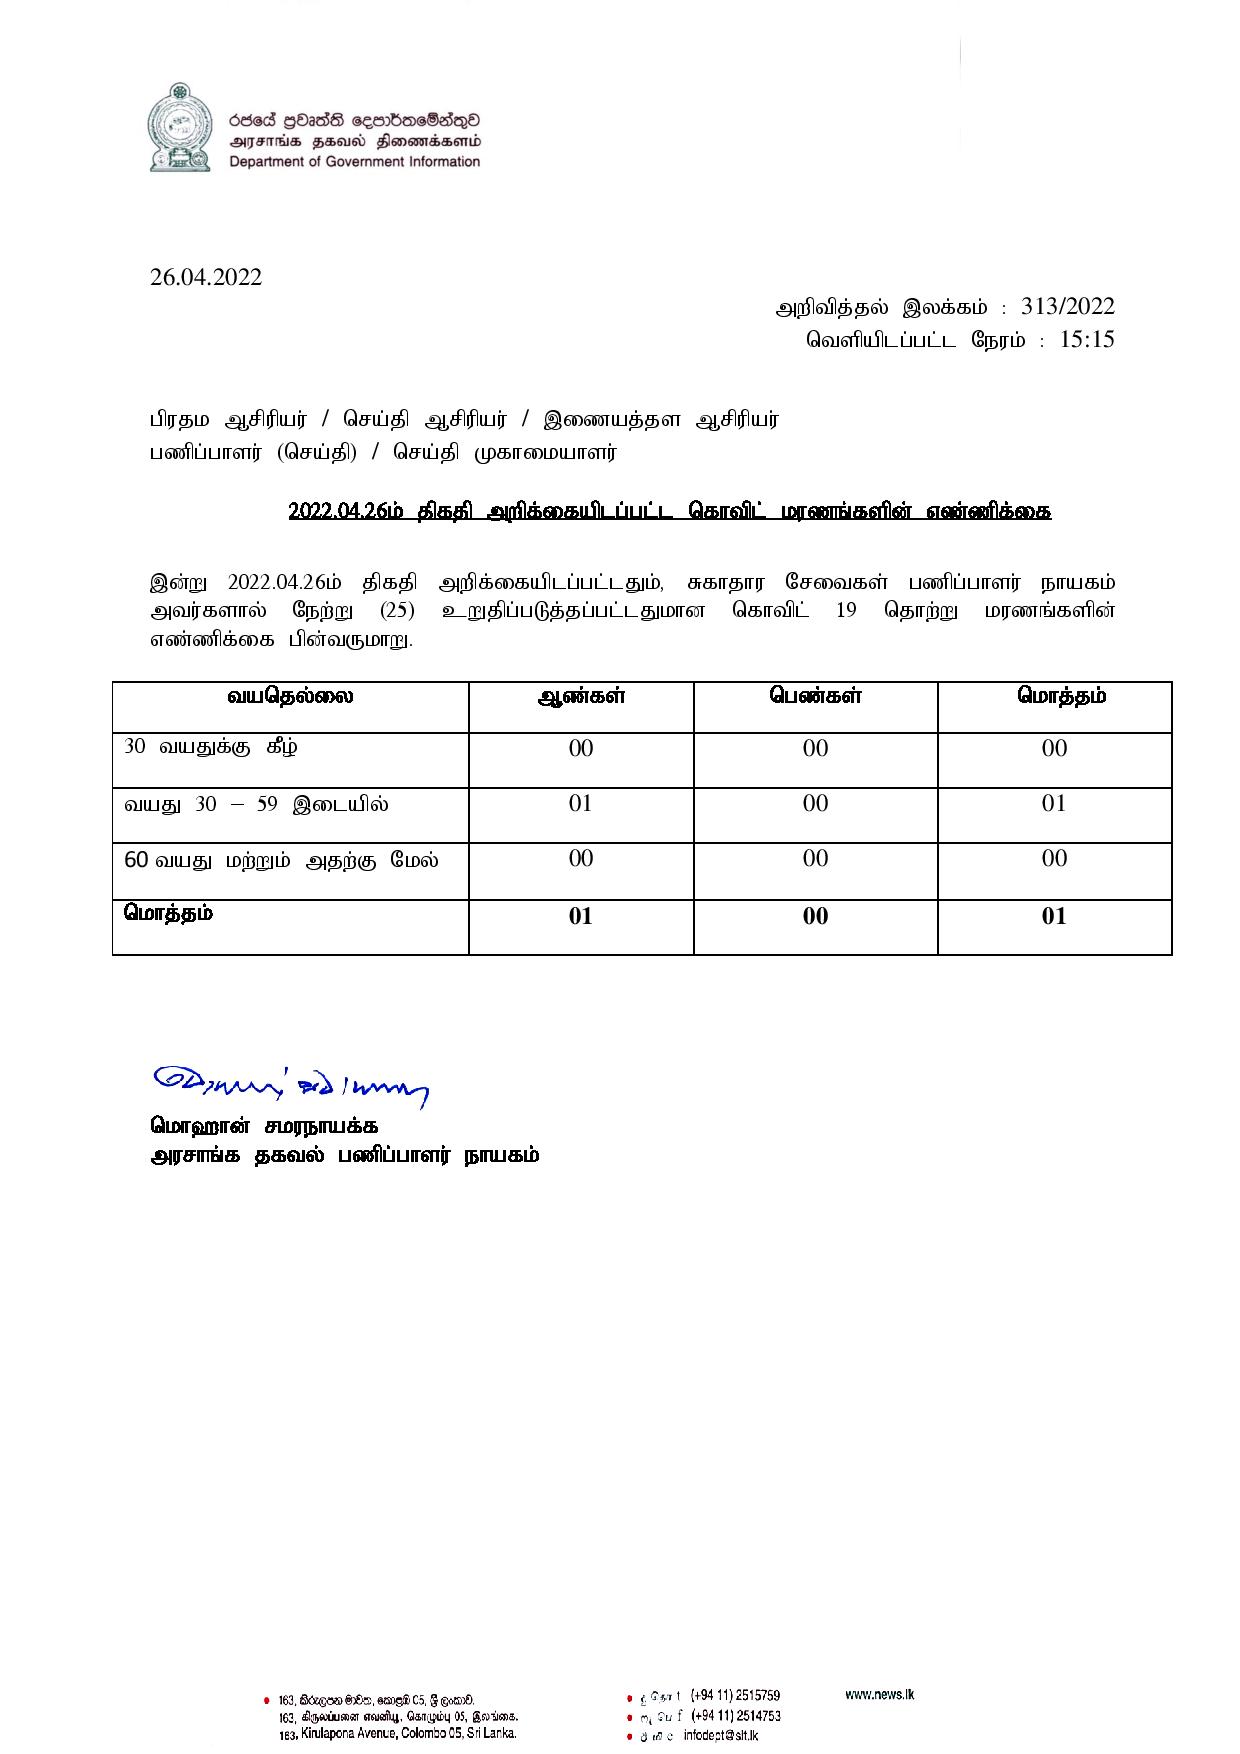 Press Release 313 Tamil page 001